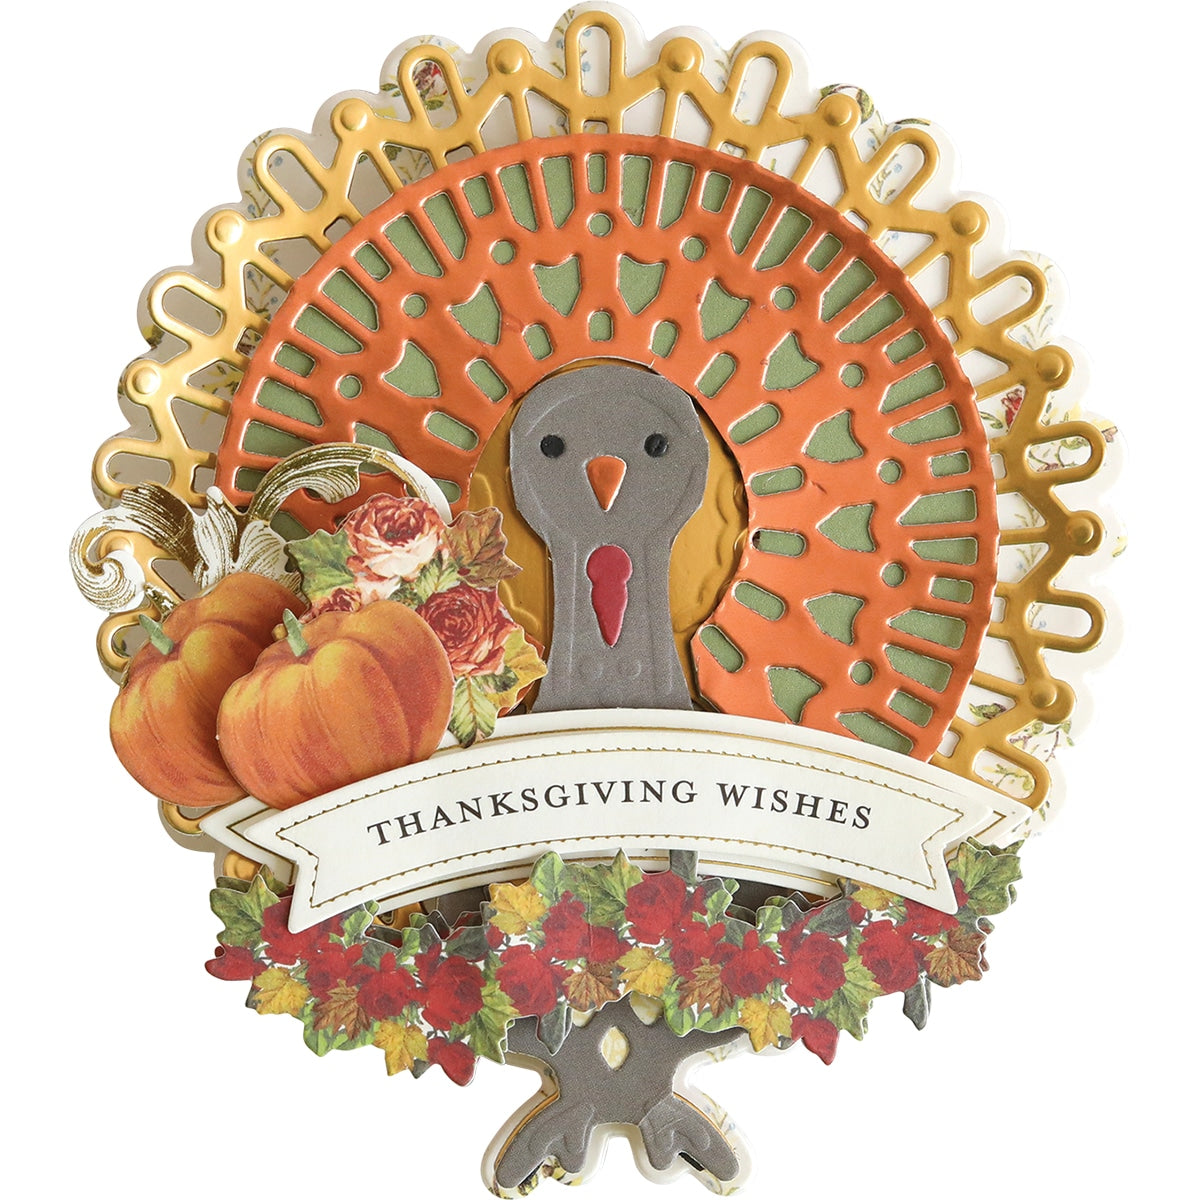 A Falloween Gift Card Holder with a turkey on it.